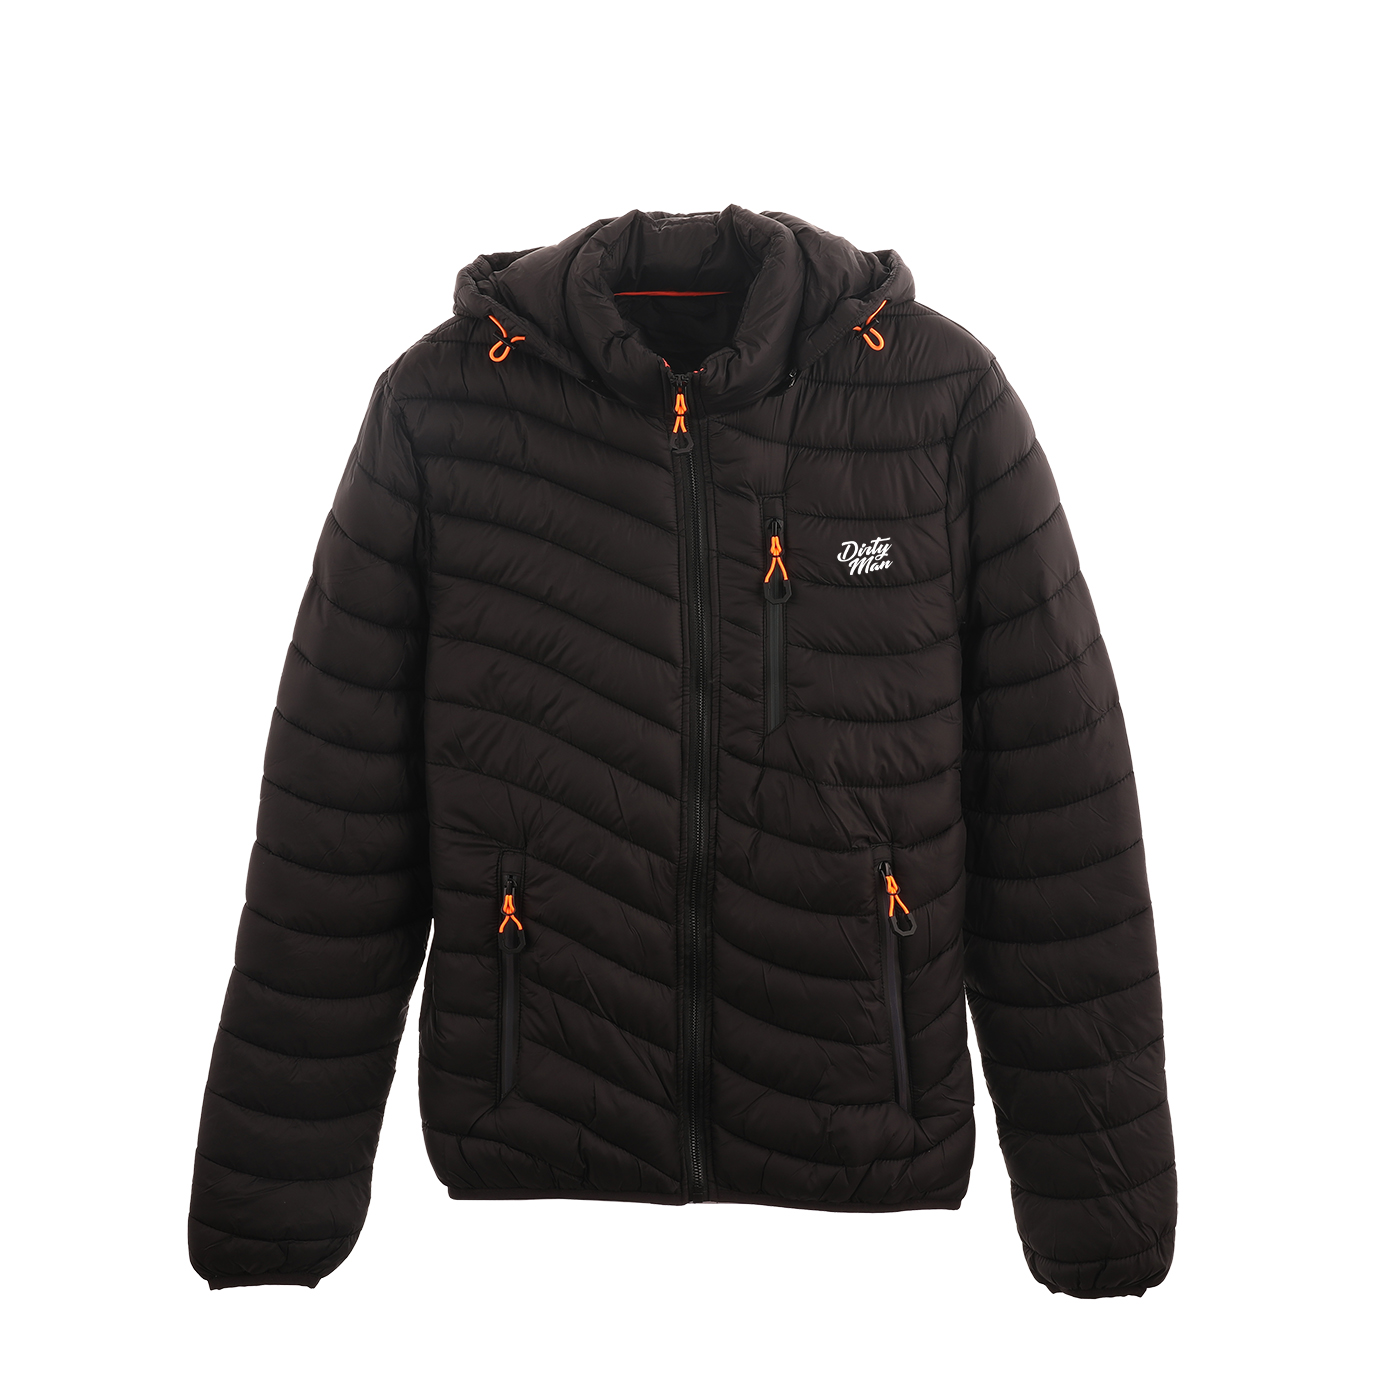 Men's Quilted Jacket With Detachable Hood